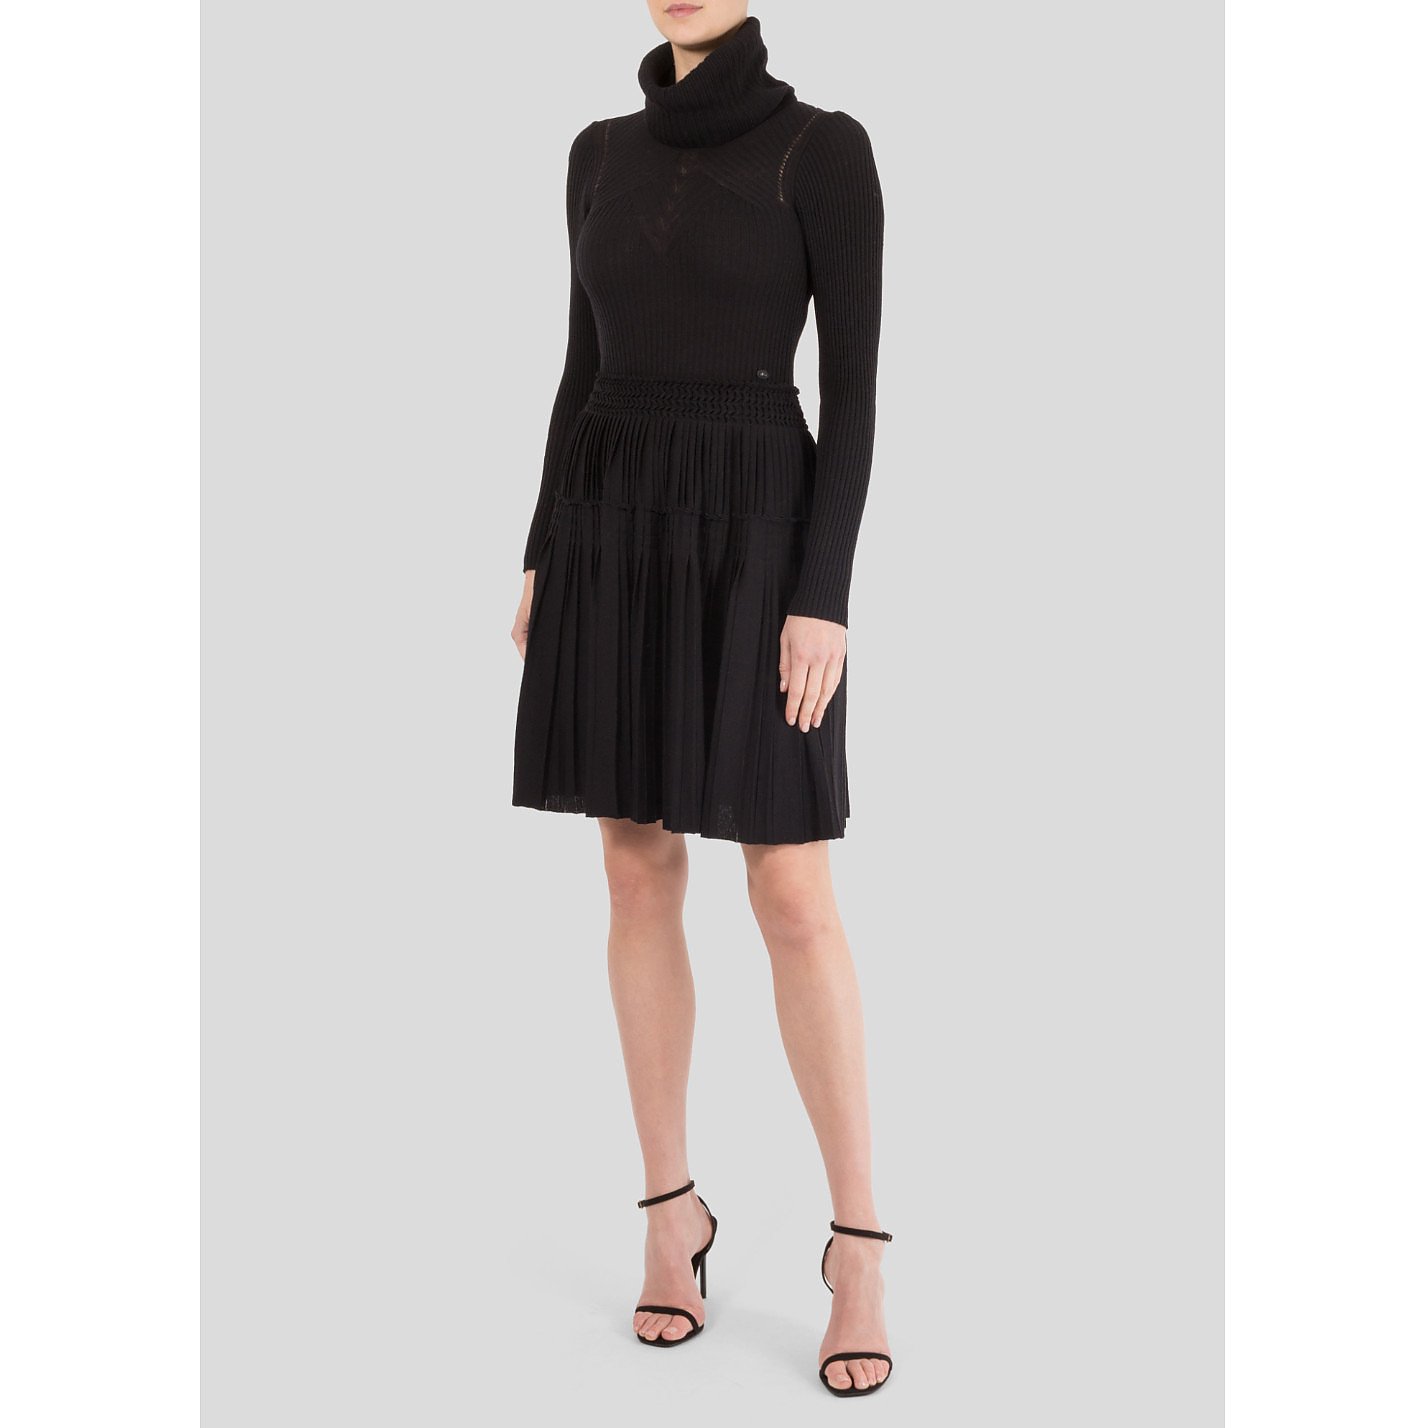 CHANEL High Neck Knitted Dress